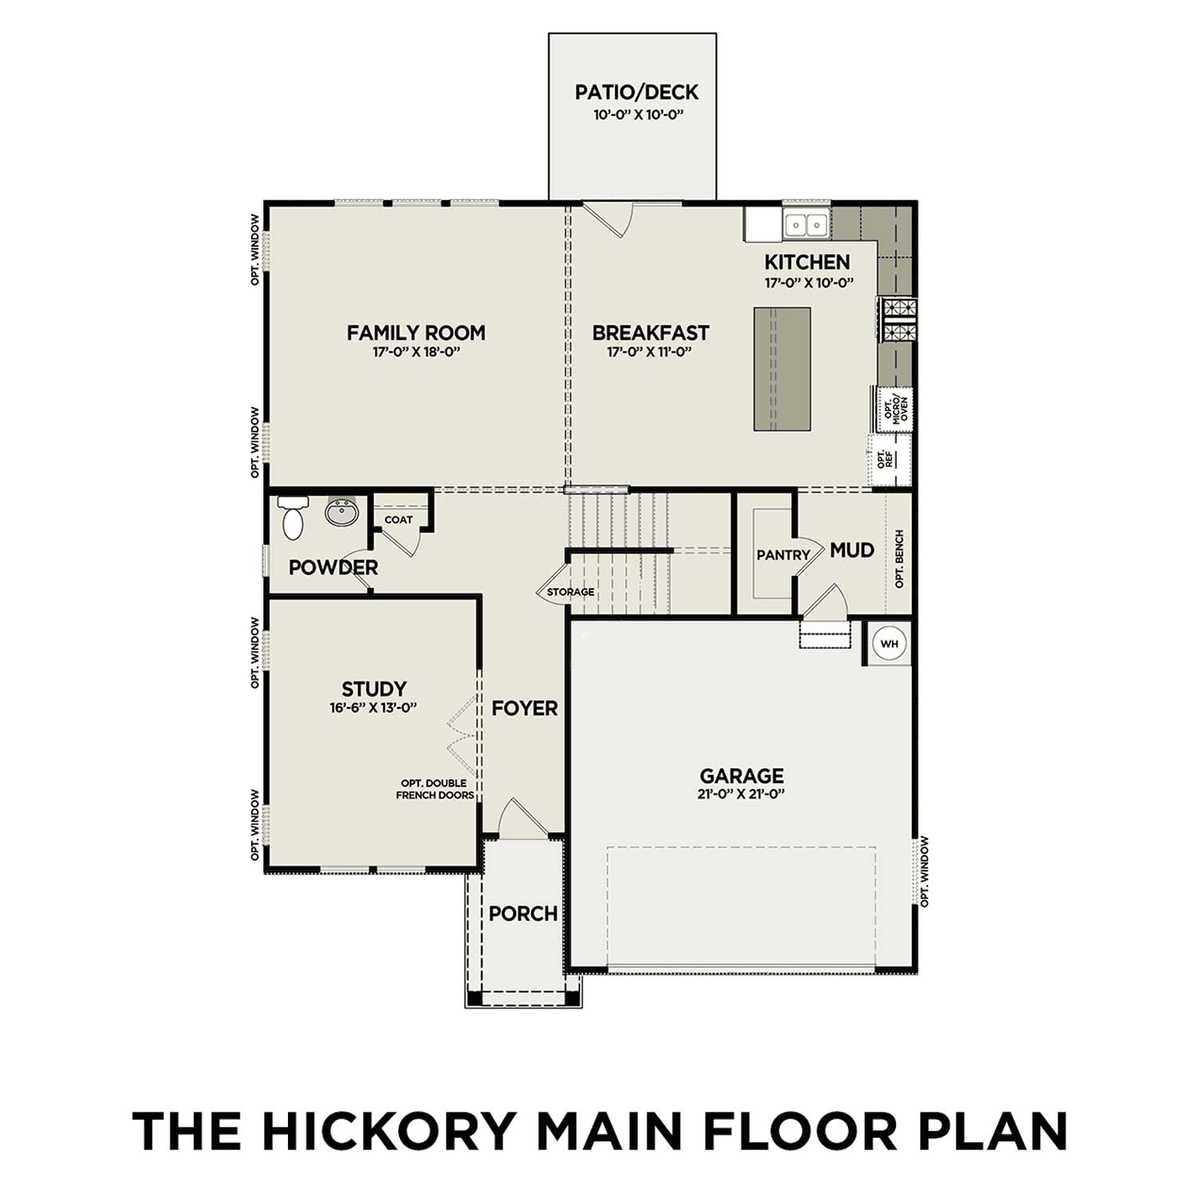 1 - The Hickory C floor plan layout for 3635 Rivermont Way in Davidson Homes' Salem Landing community.